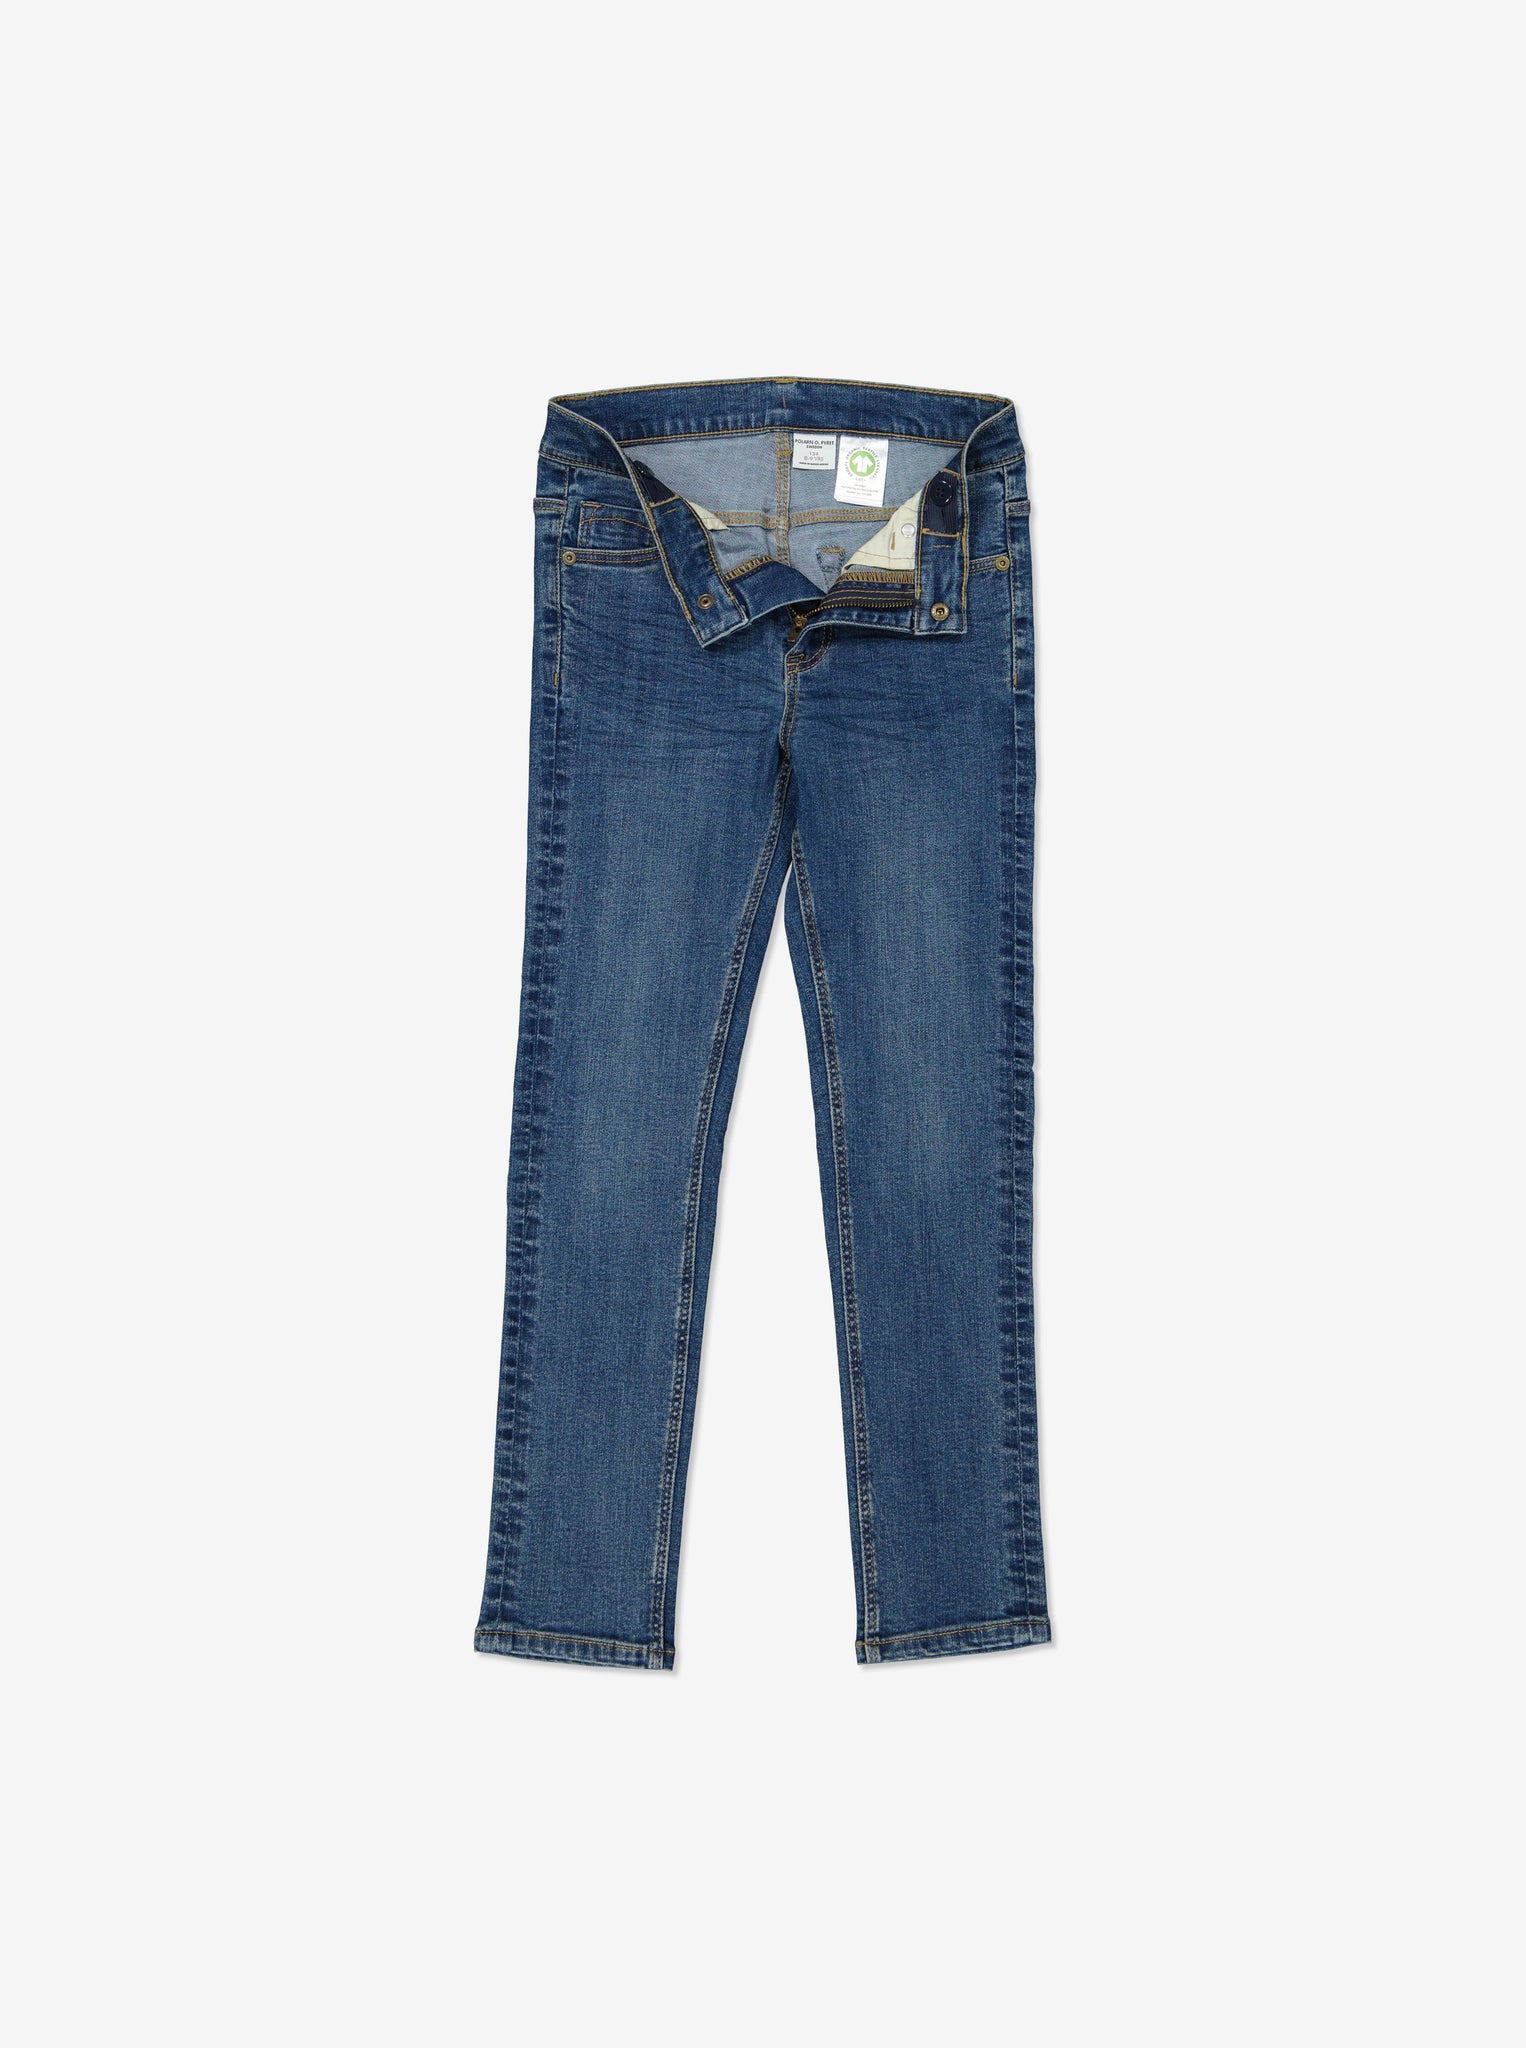  Organic Kids Slim Fit Blue Denim Jeans from Polarn O. Pyret Kidswear. Made from sustainable materials.